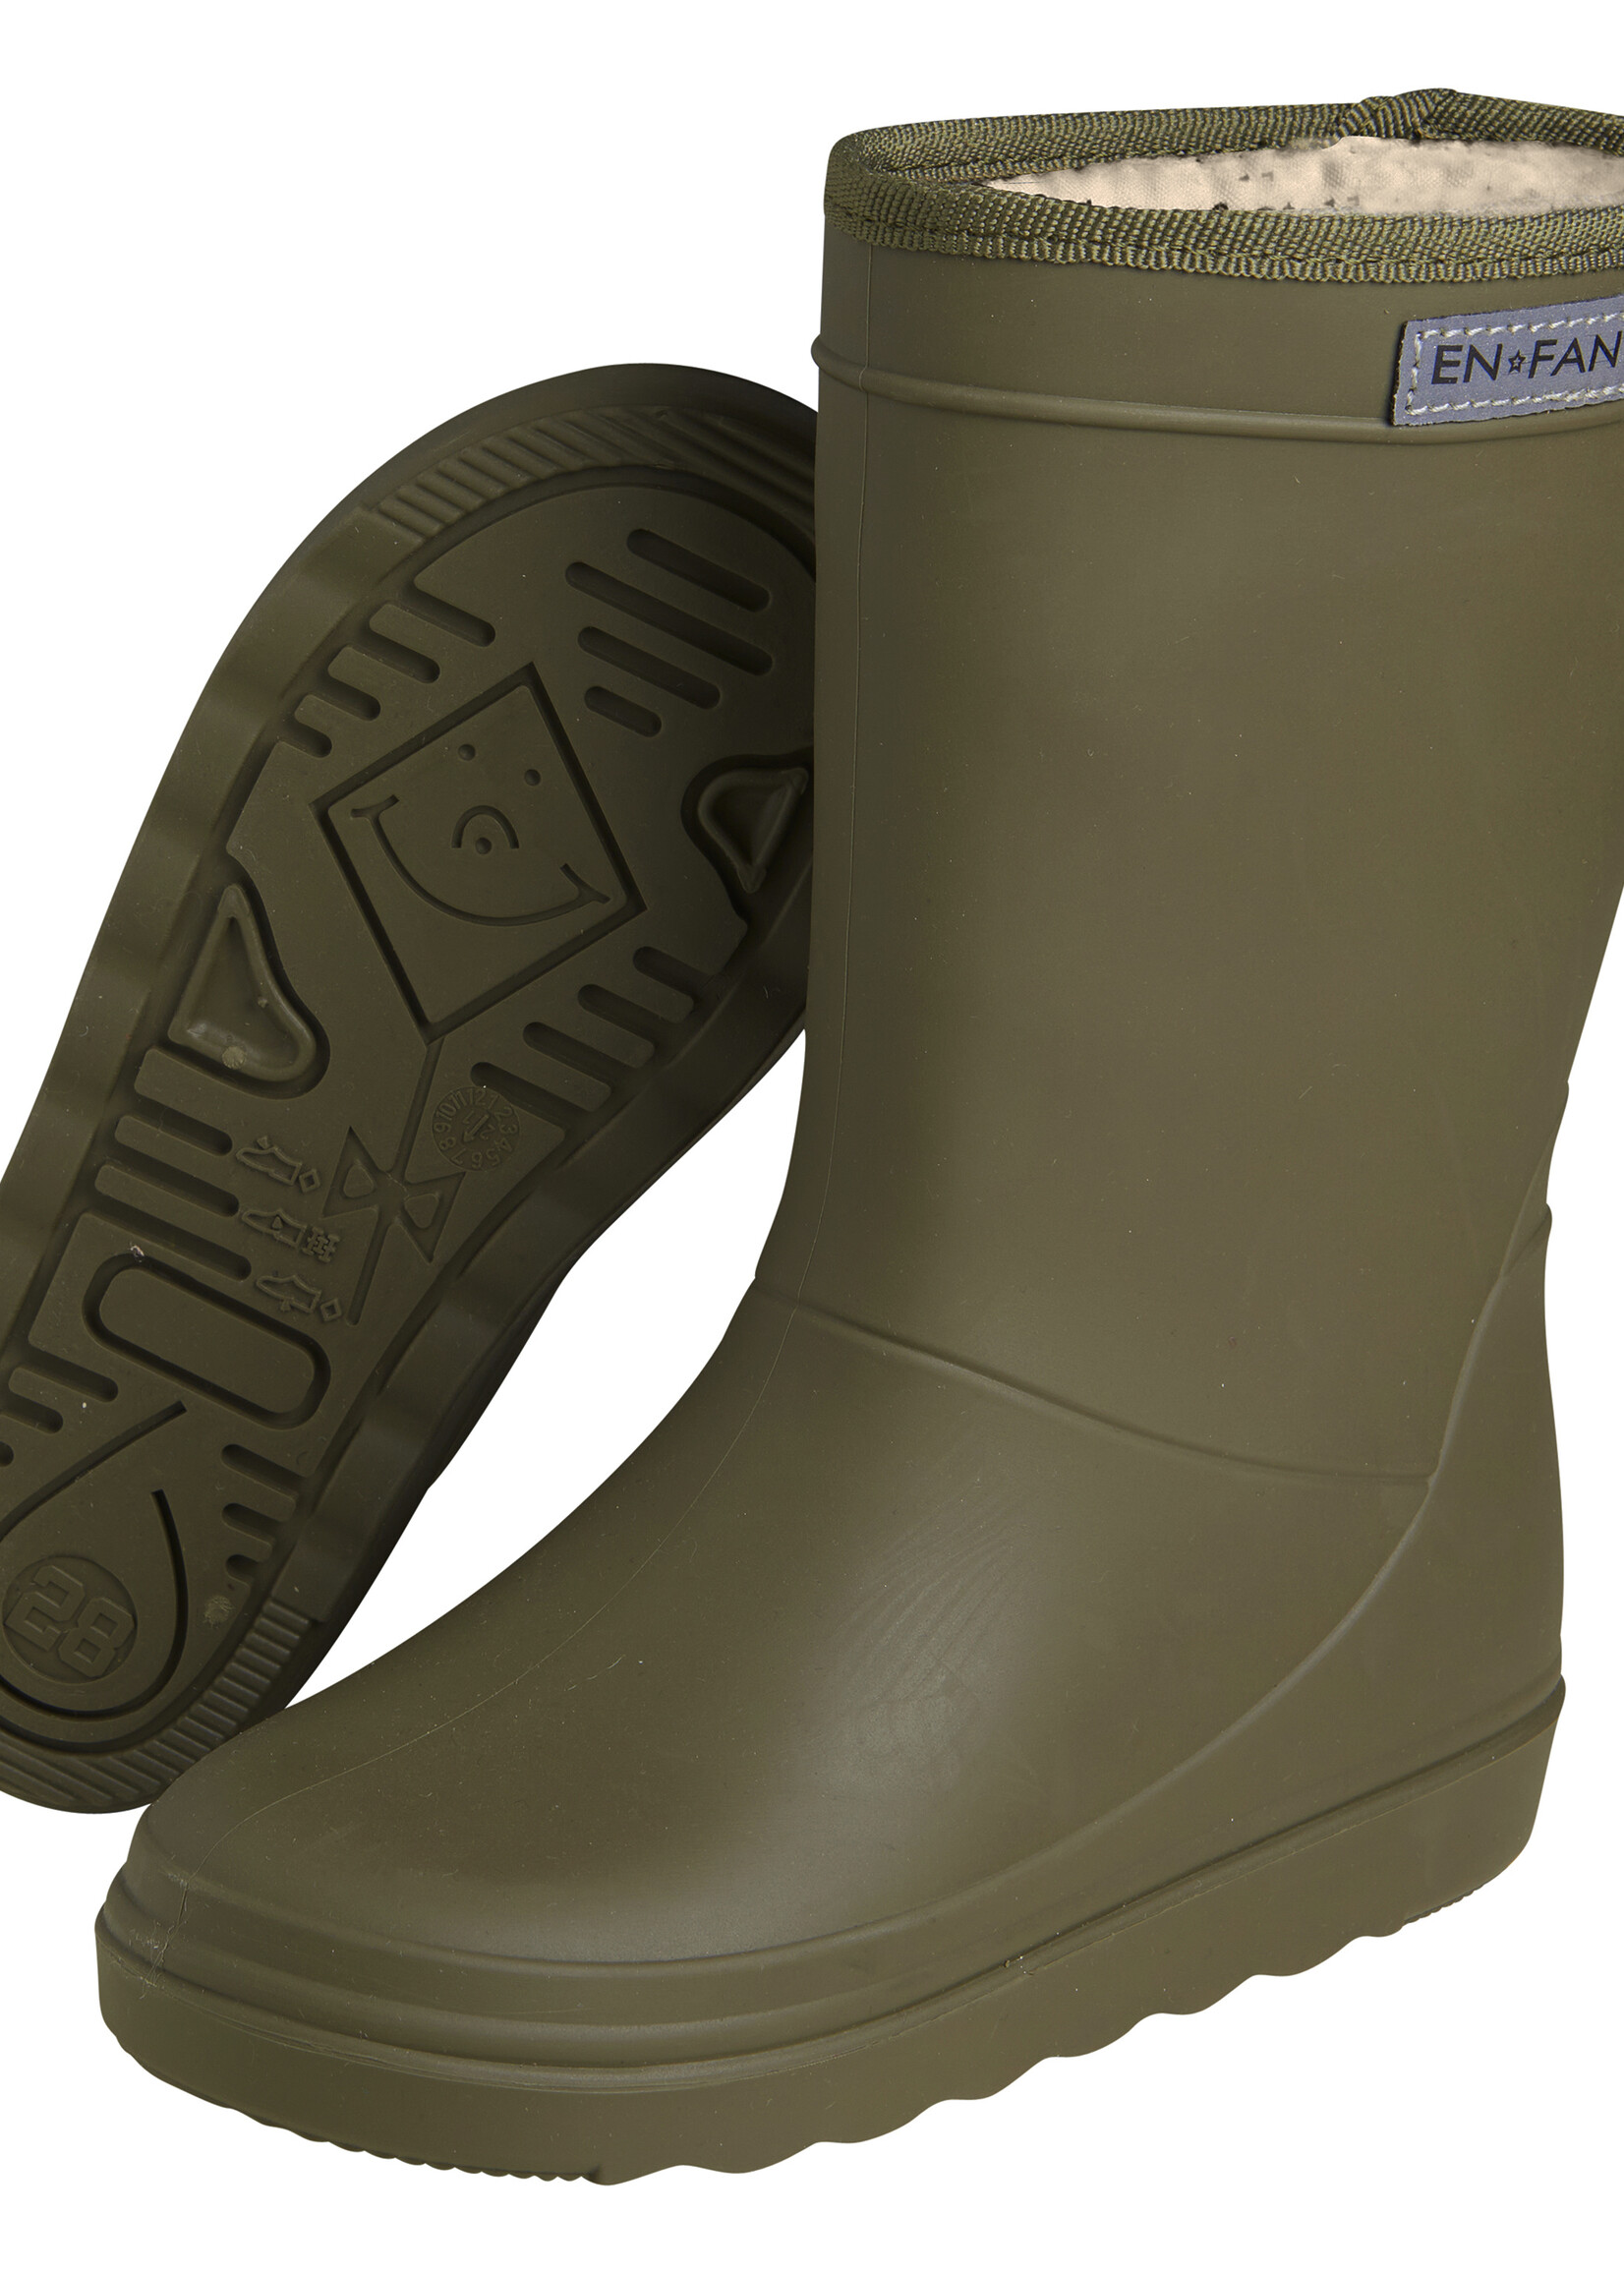 ENFANT Thermo Boots, Ivy Green, W23